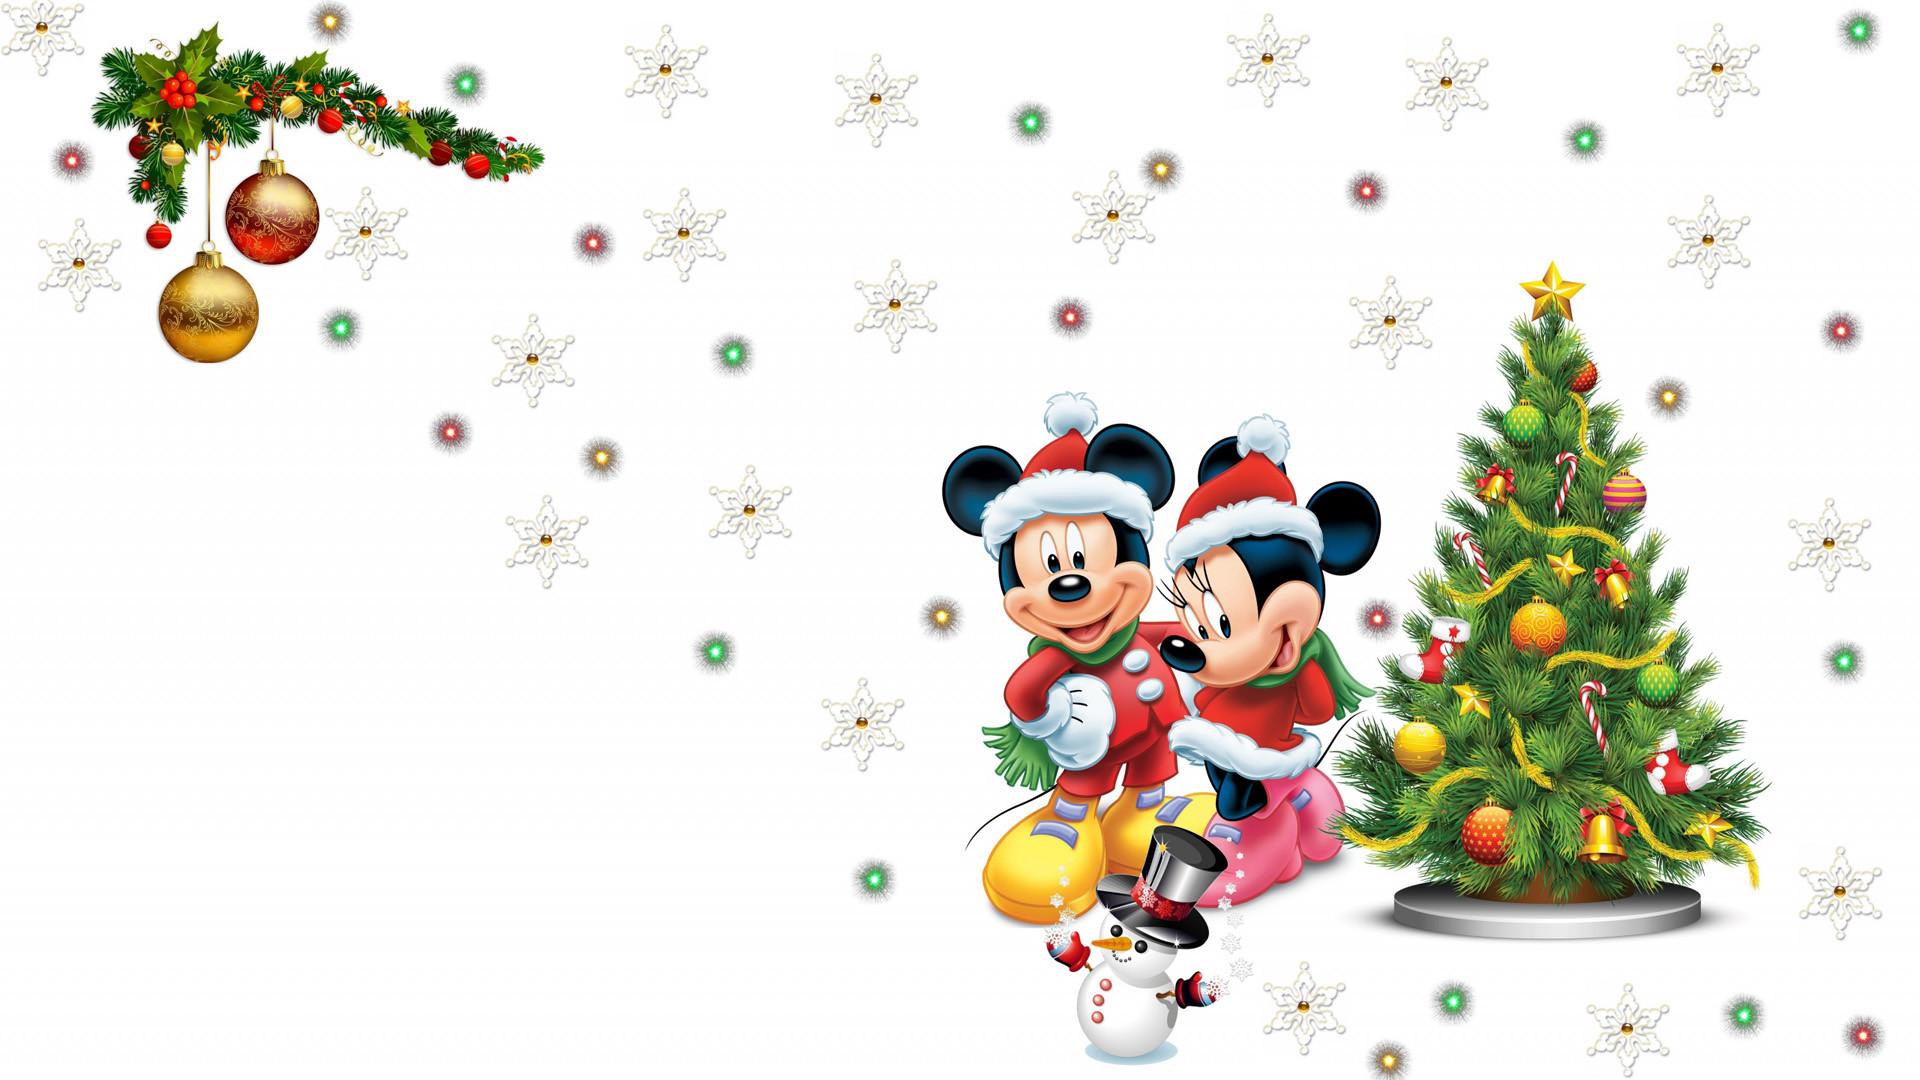 Mickey's Christmas Wallpapers - Wallpaper Cave